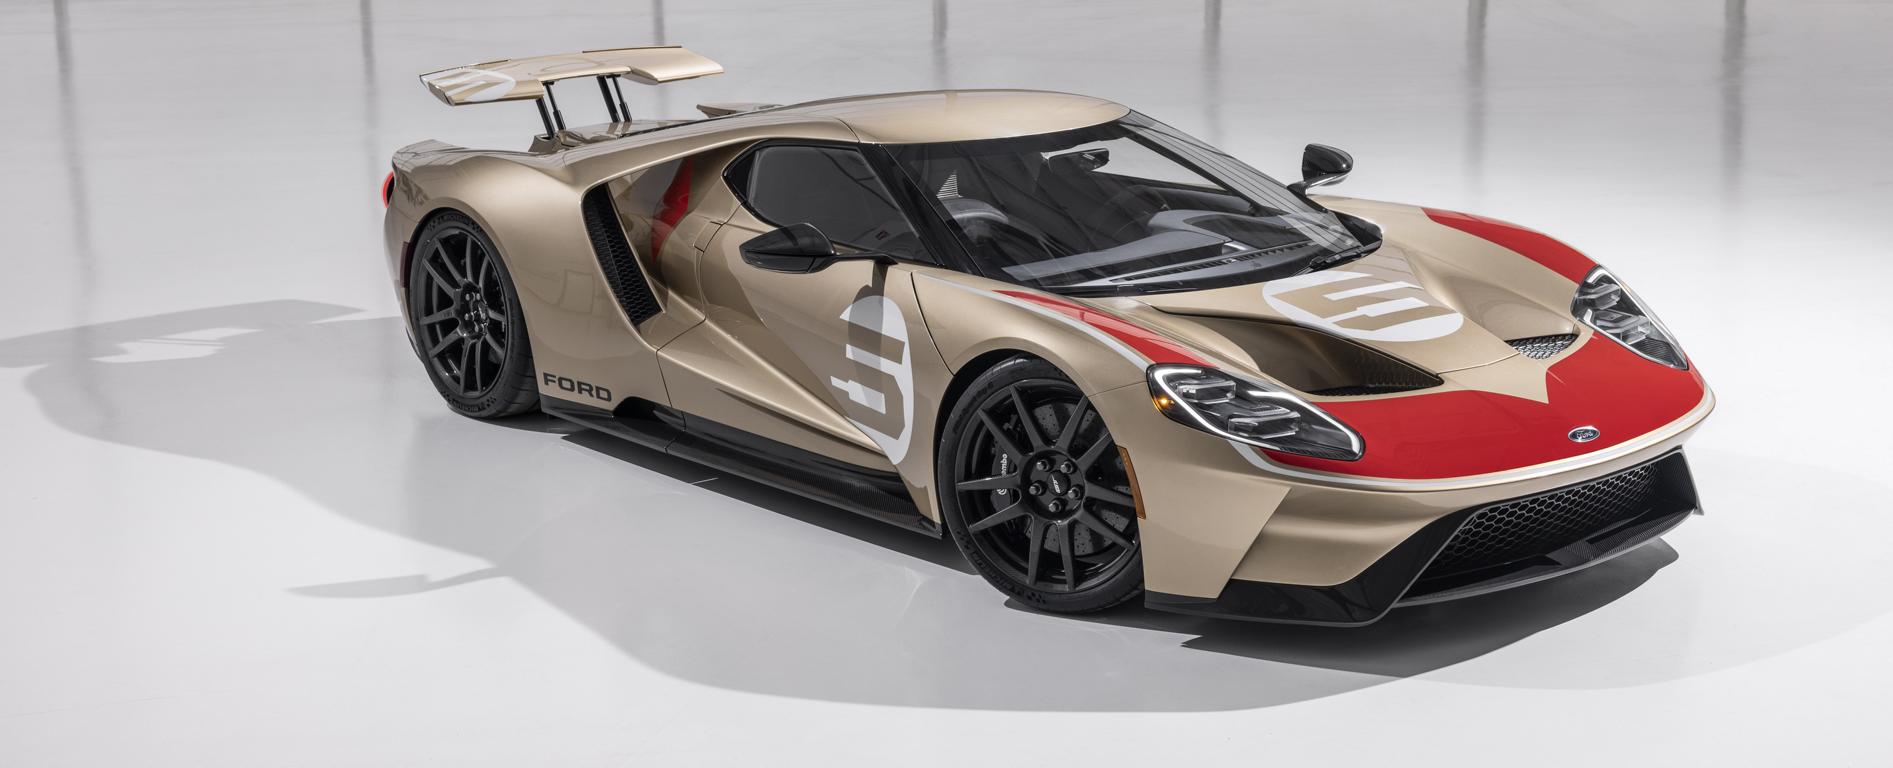 2022 Ford GT Holman Moody Heritage Edition 06